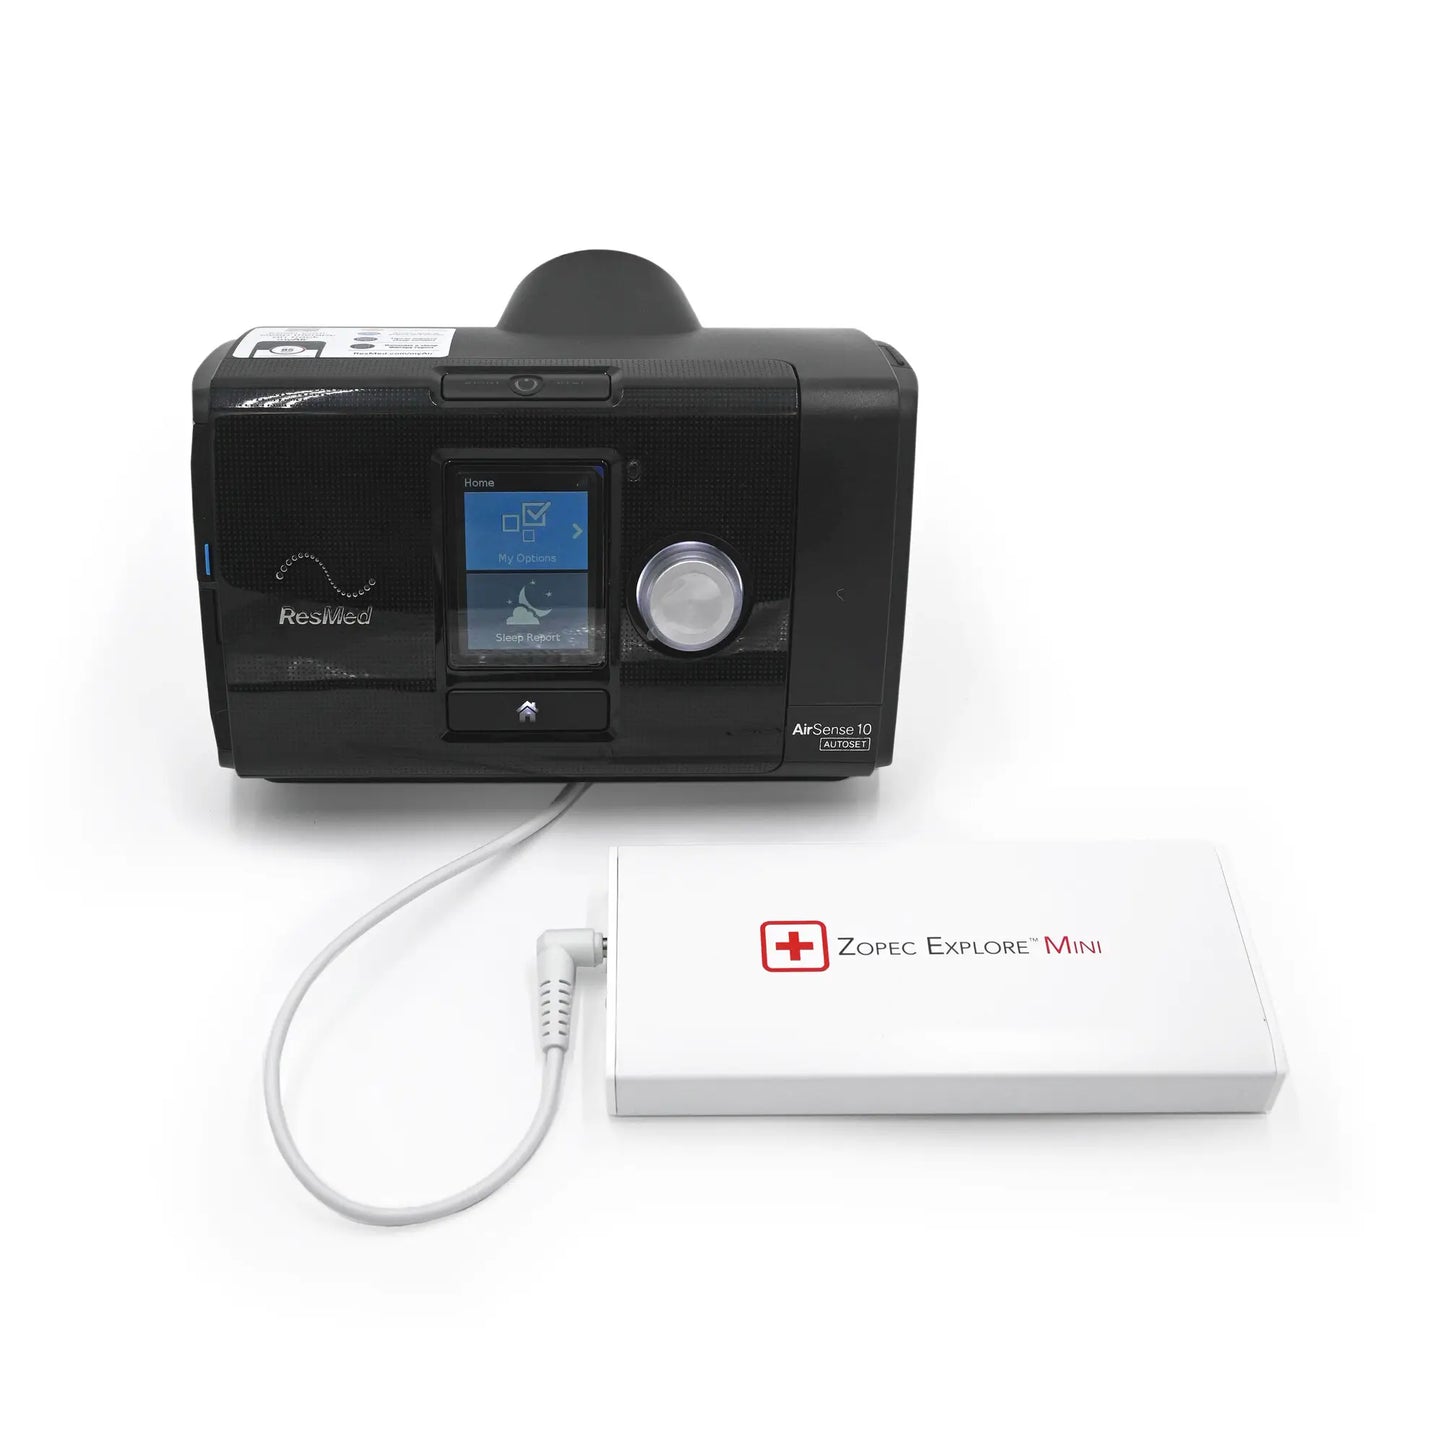 CPAP Travel Battery Explore Mini set up with an AirSense 10, ensuring uninterrupted sleep therapy on trips.